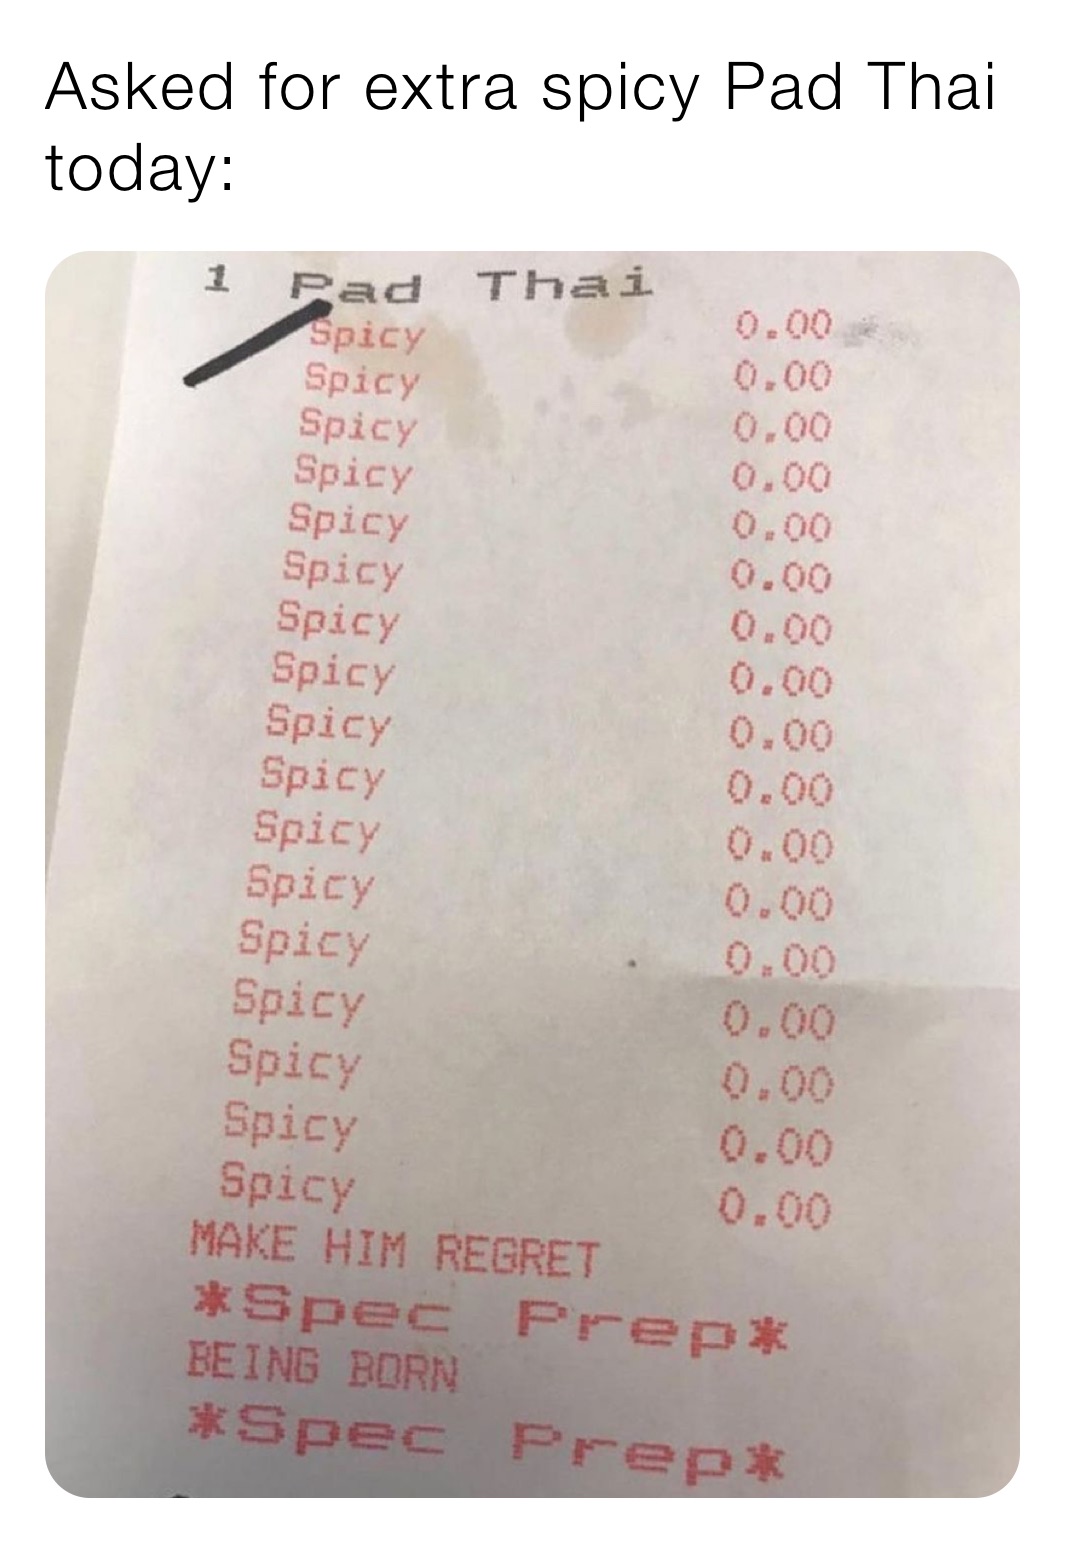 Asked for extra spicy Pad Thai today: